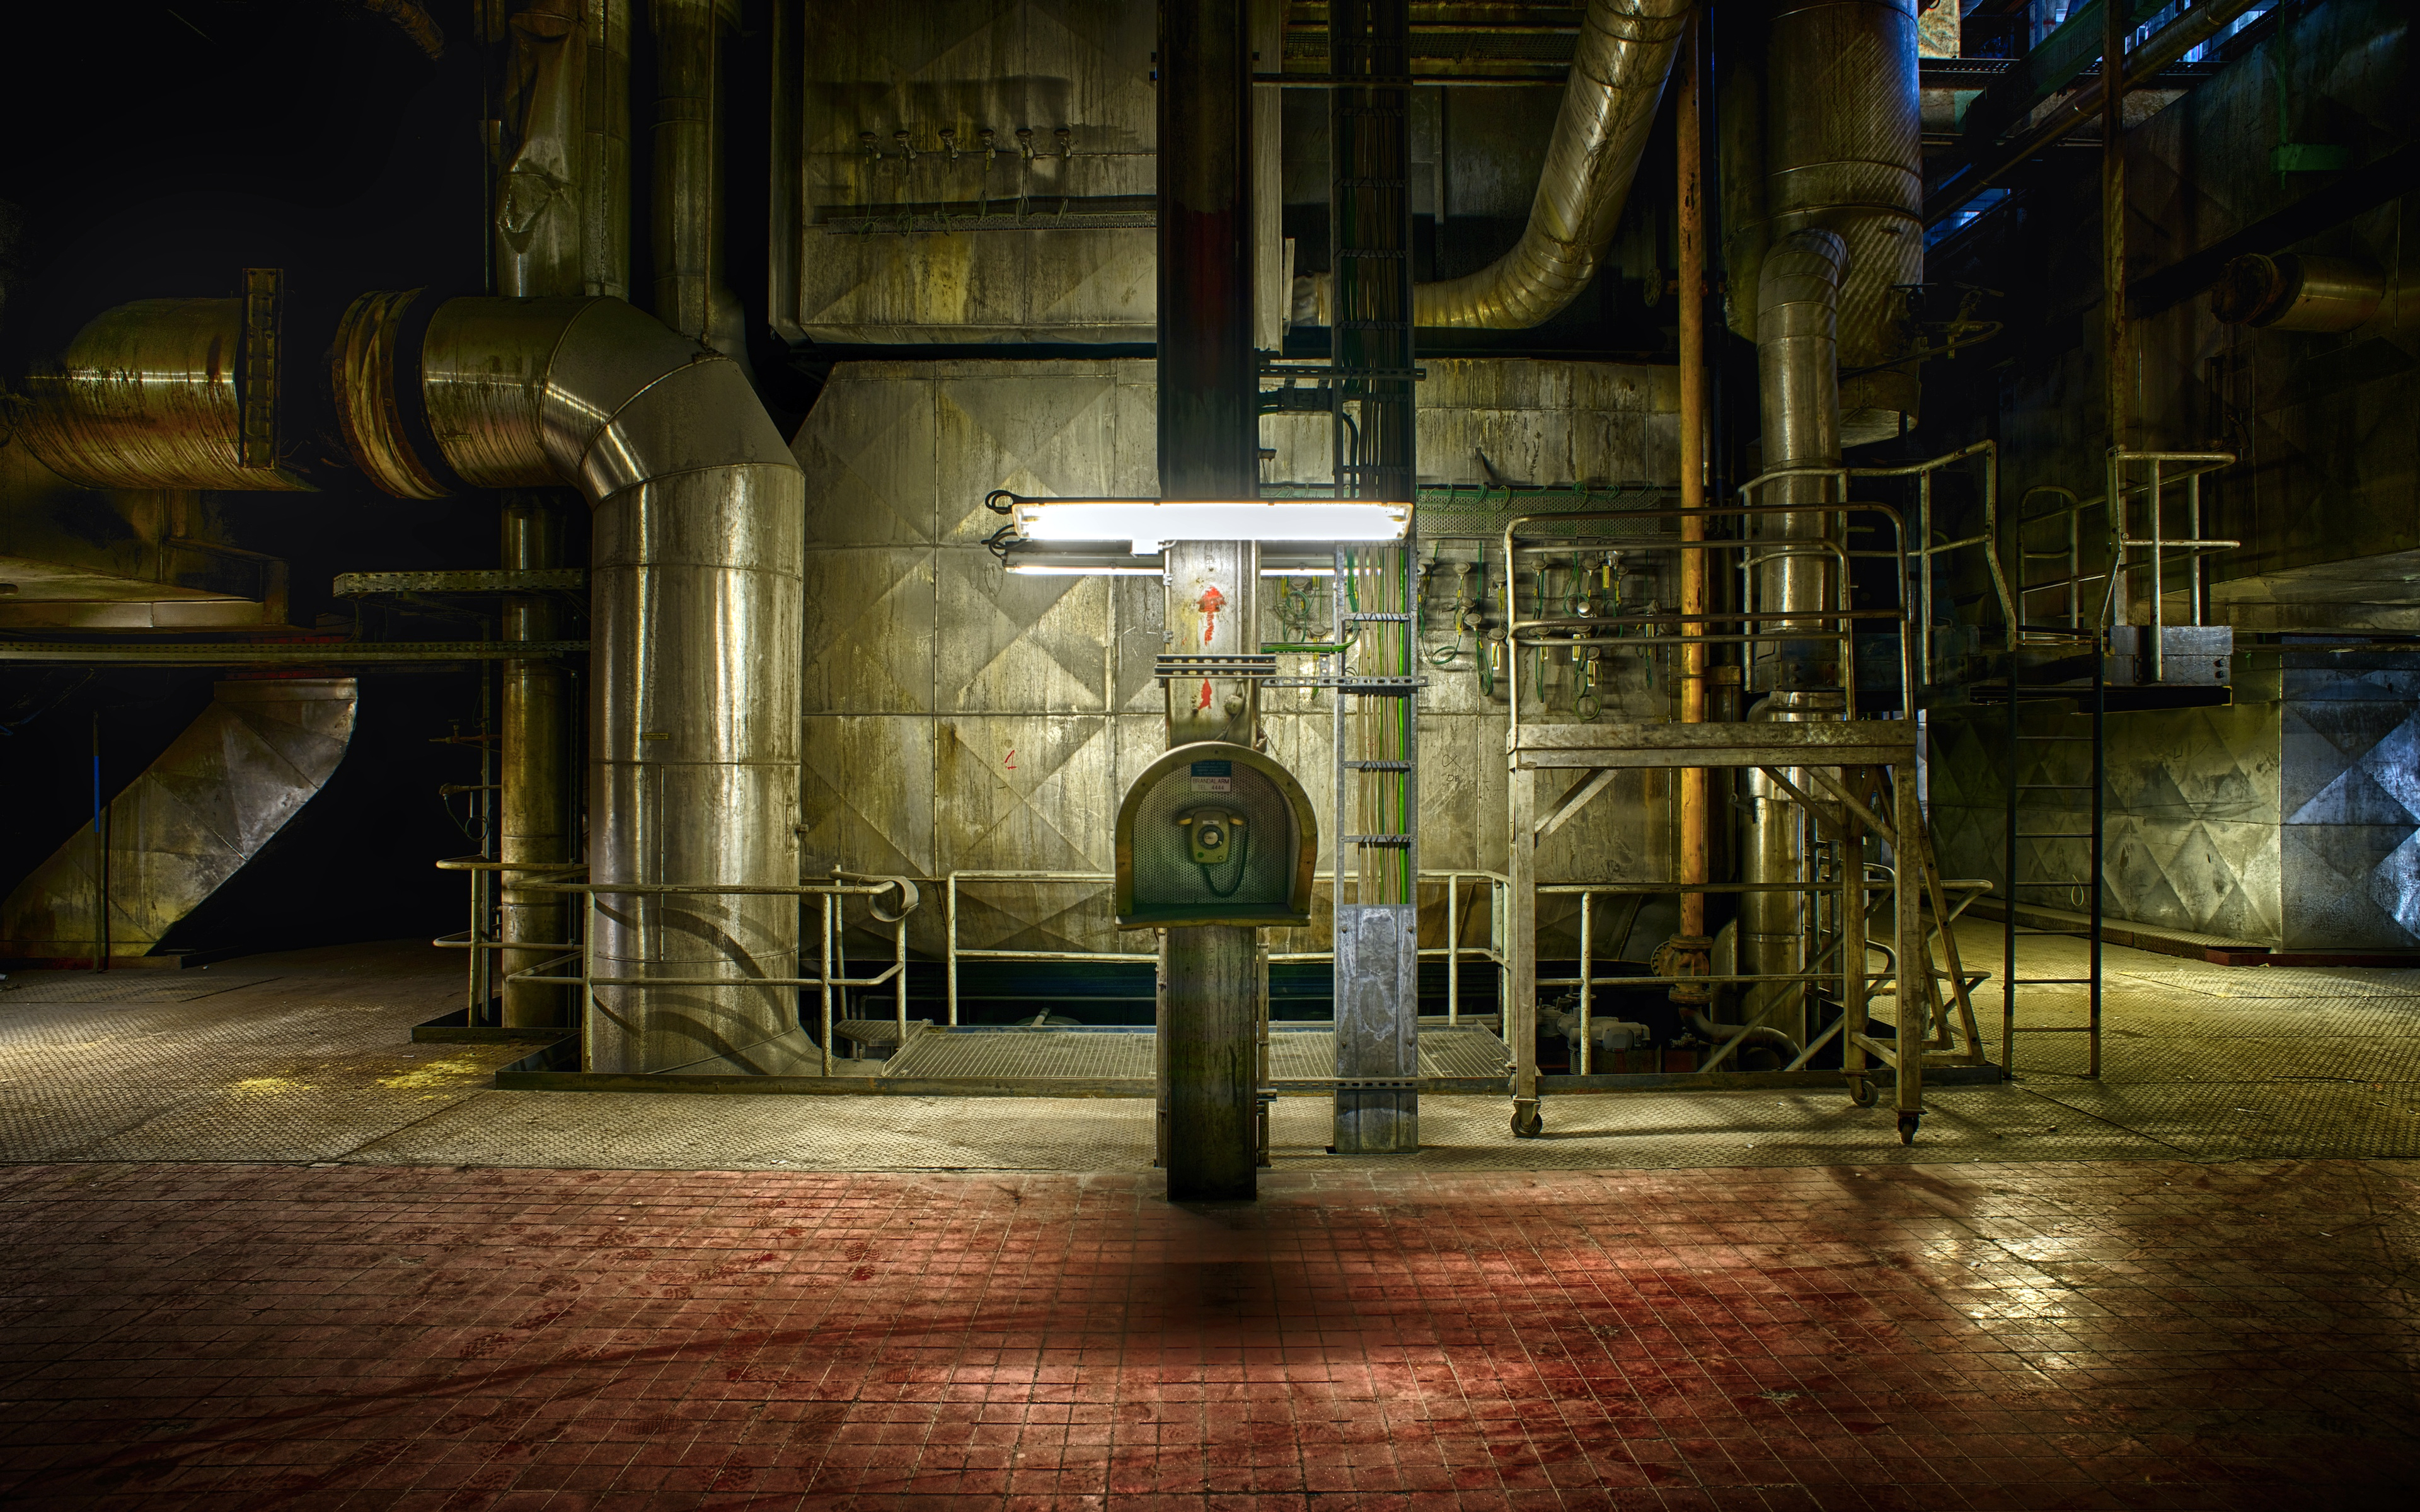 Telephone Power Plant Factory Abandoned Industrial Wallpaper:3840x2400